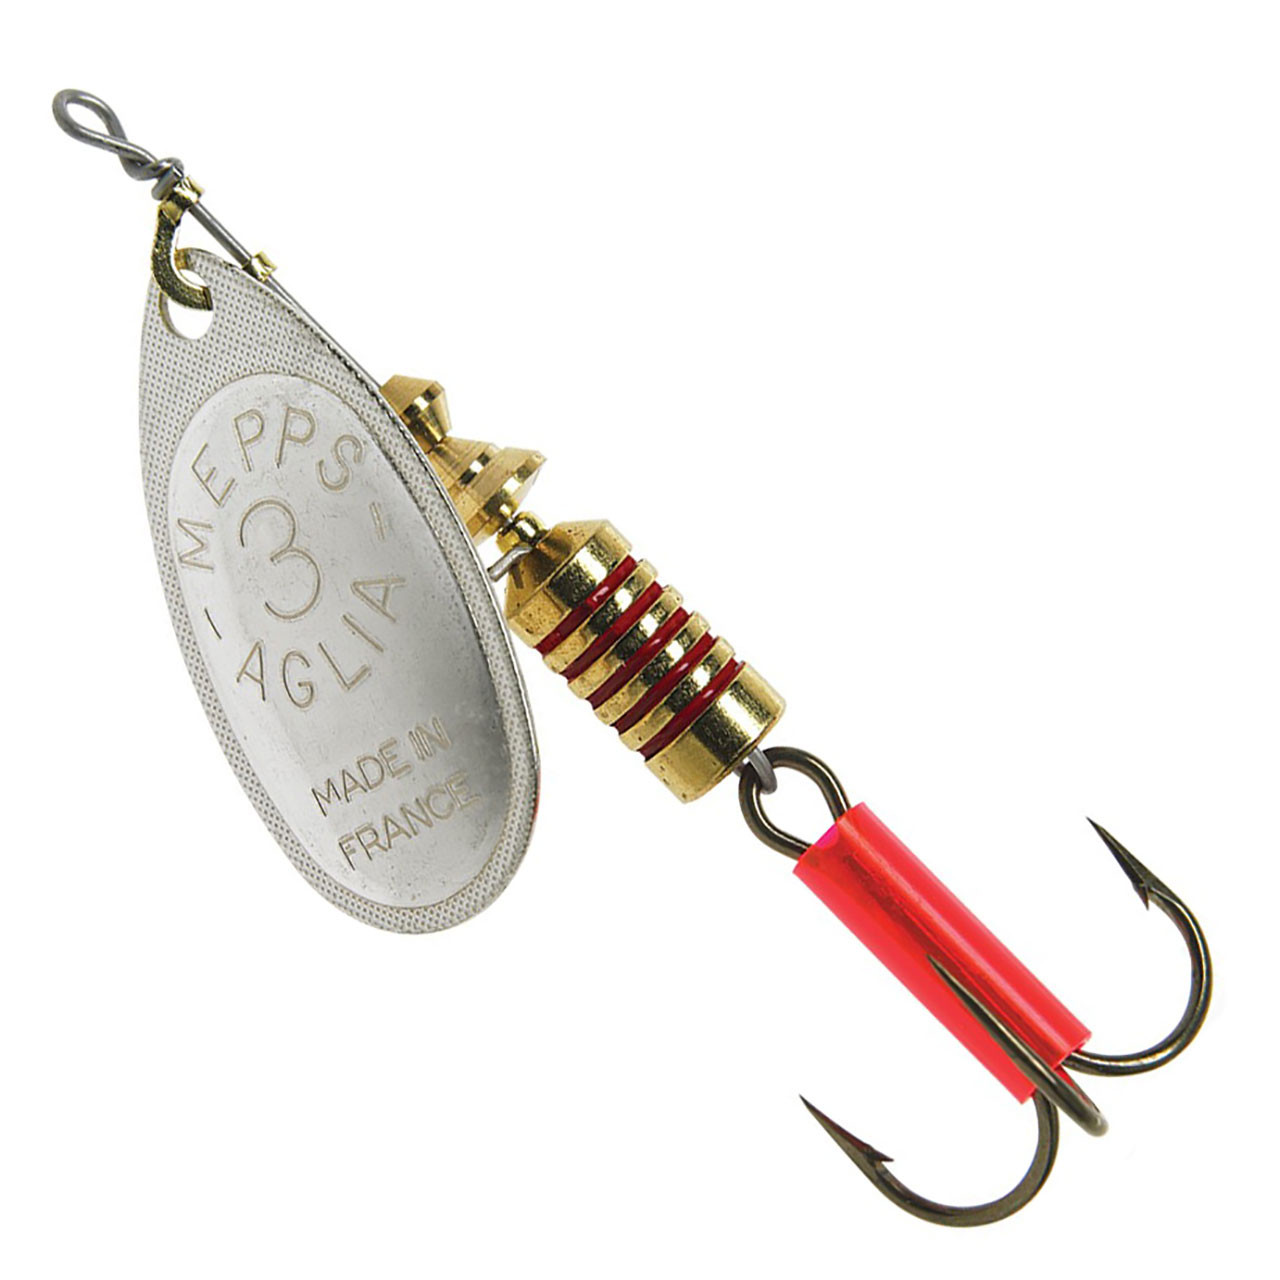 Mepps Aglia Spinner Lures 2.5g-13g Silver/Copper/Gold Blades -  Fishing/Angling 